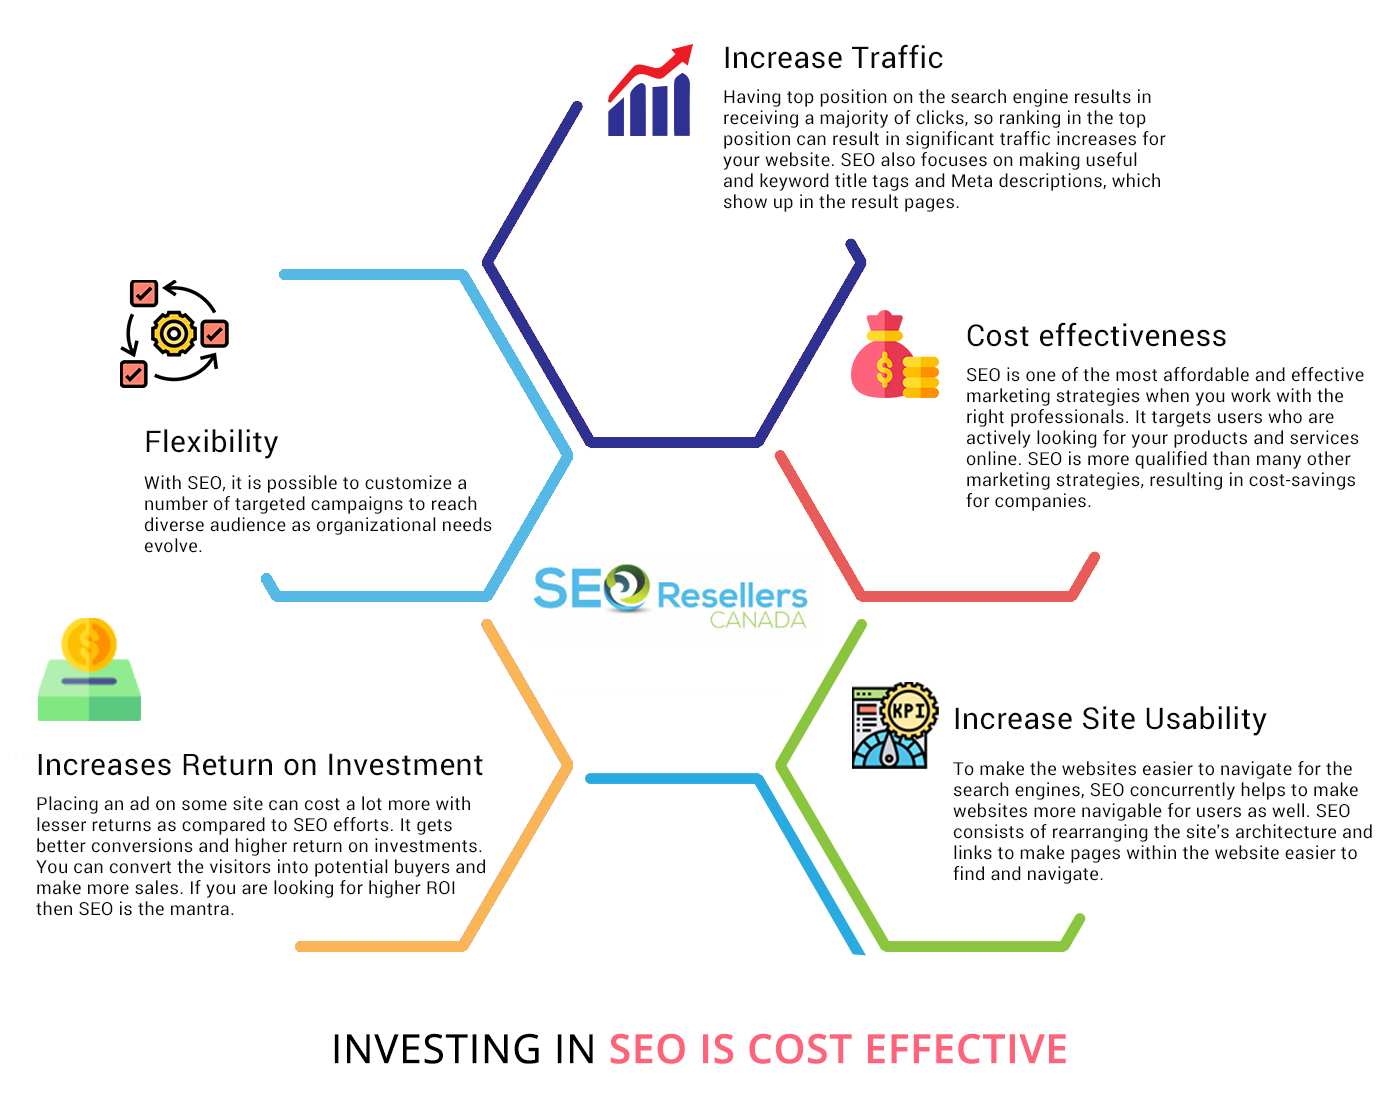 Investing in SEO Is Cost Effective